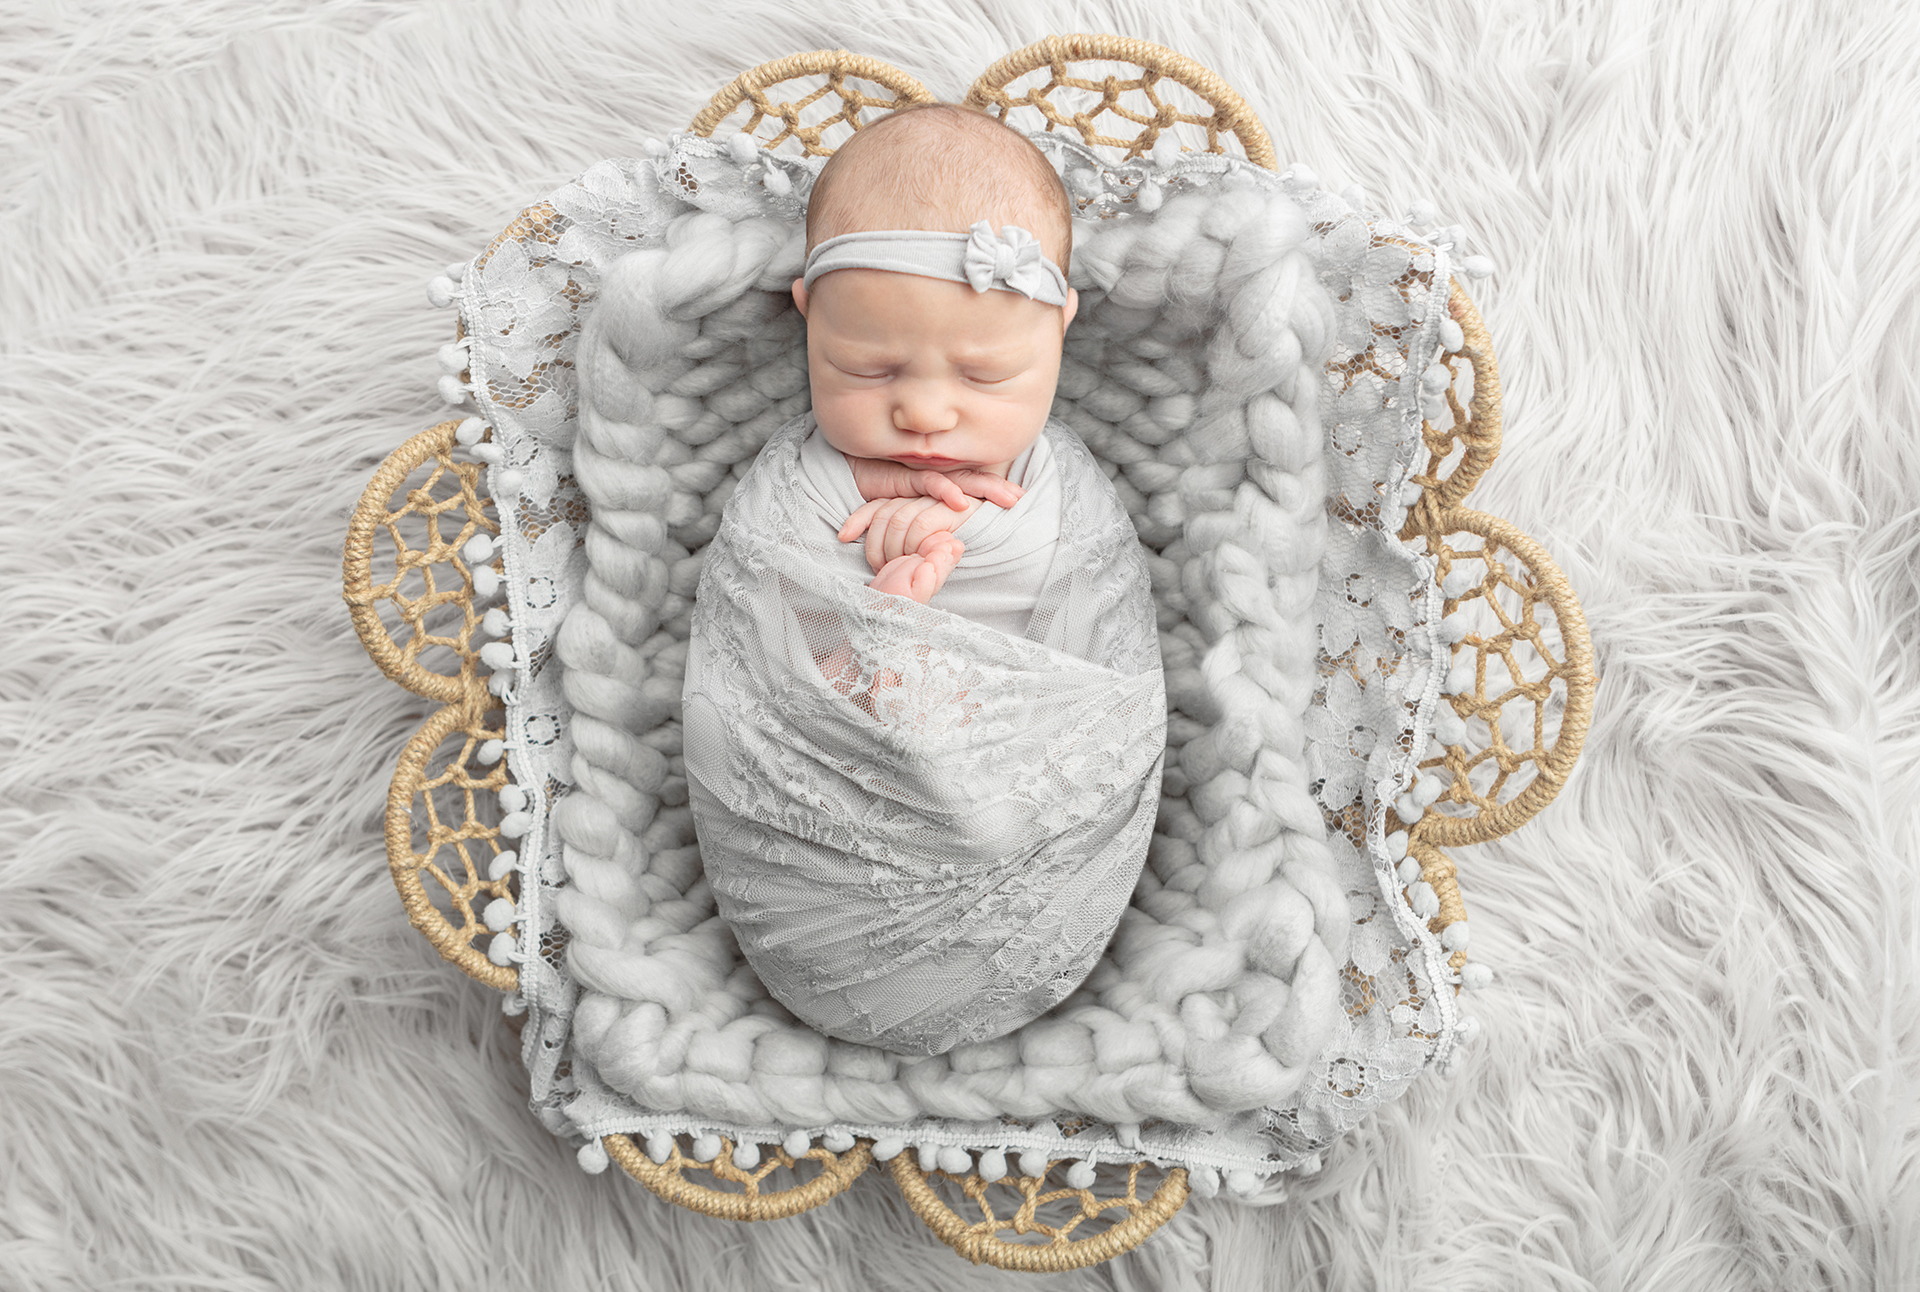 A newborn baby girl is beautifully swaddled in gray lace. She lies on a chunky silvery gray blanket, layered in a flower shaped basket, placed on a gray flokati.